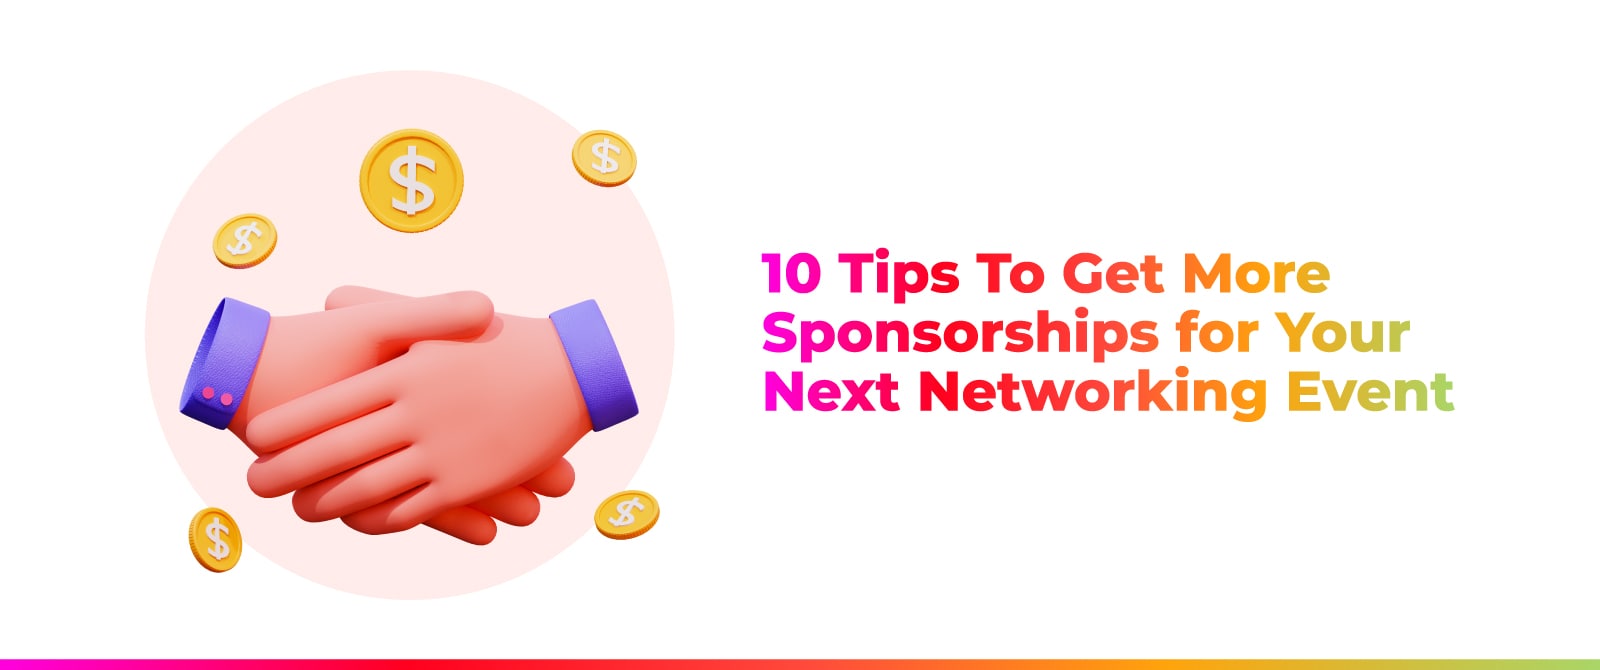 10 Tips To Get More Sponsorships for Your Next Networking Event